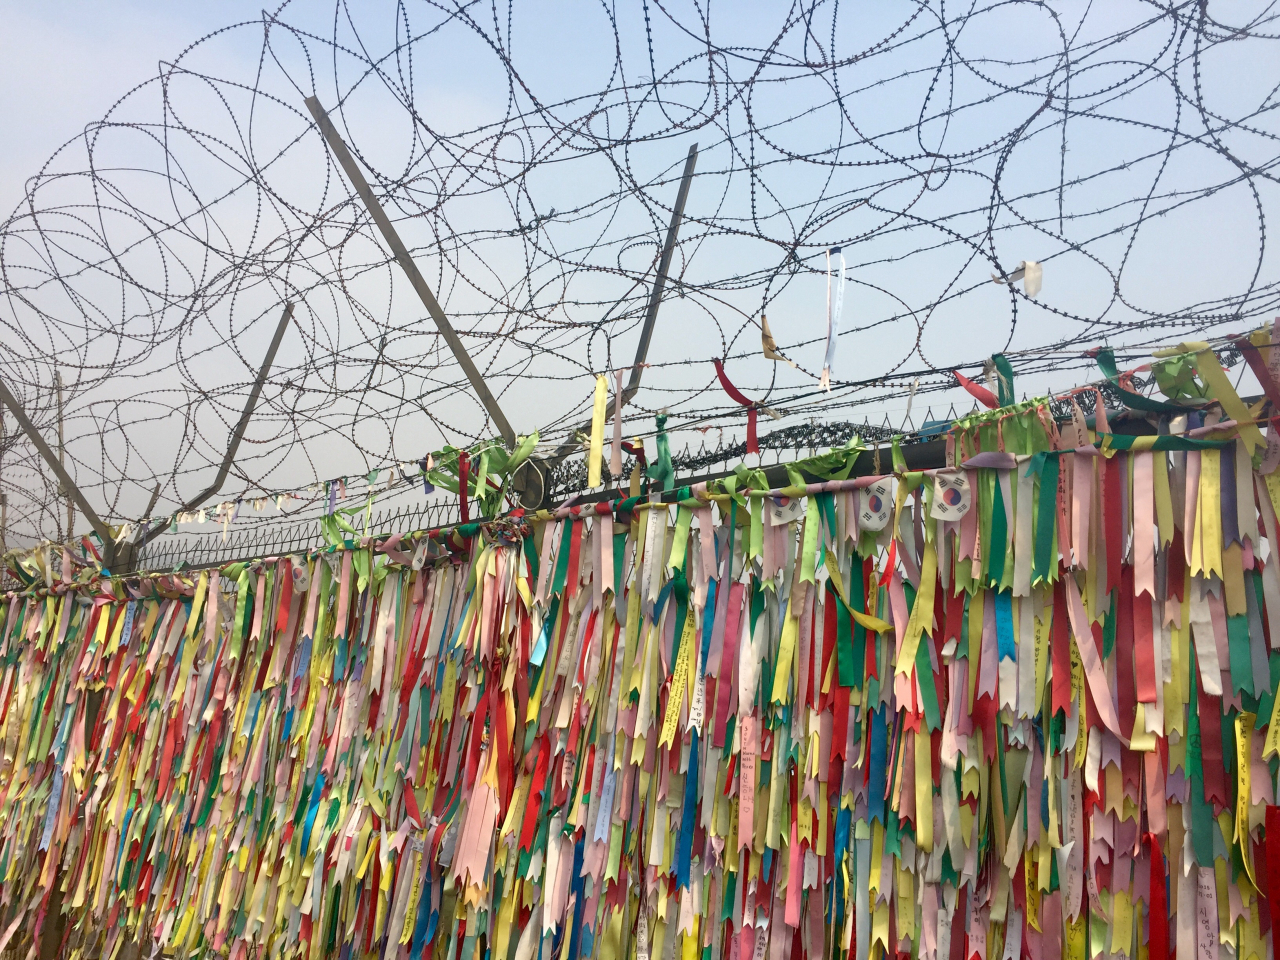 The fences surrounding Imjingak Village in the DMZ on the North Korean border are adorned with brightly colored ribbons. These ribbons frequently bear messages of peace, prayers, and well-wishes for family members residing in North Korea. (Photo Courtesy of anokarina's Flicker)